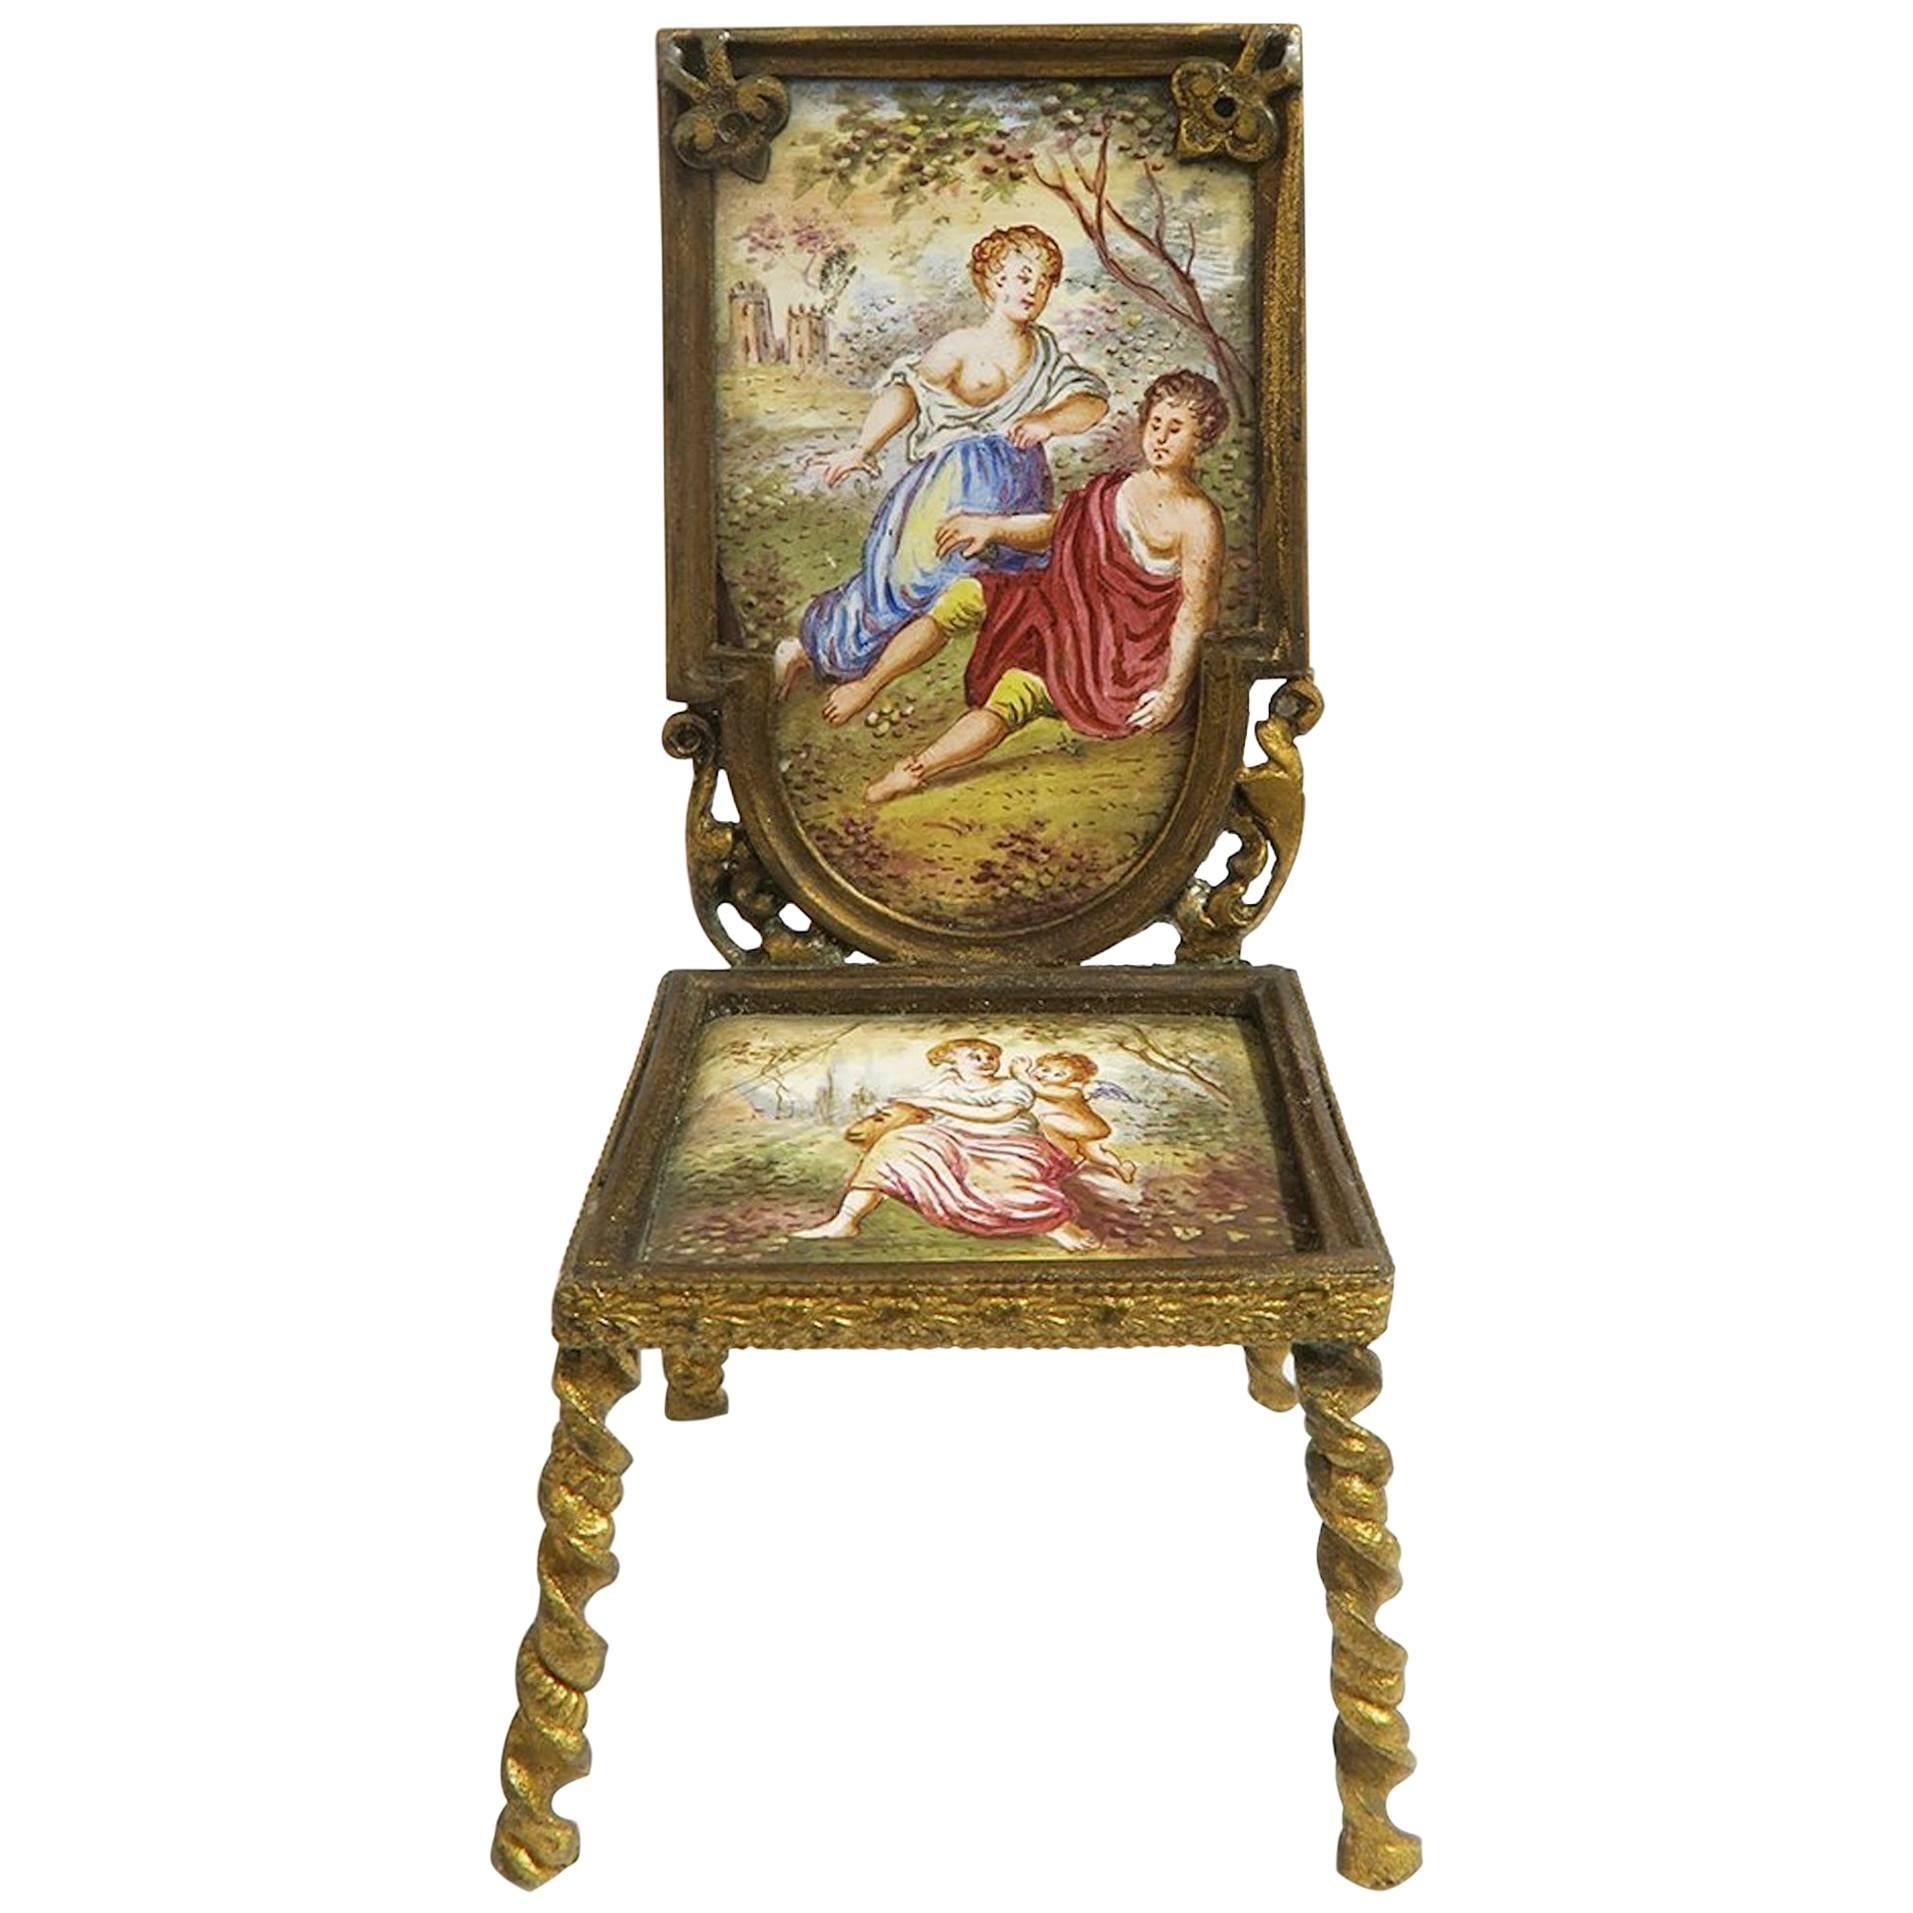 19th Century Viennese Enamel and Bronze Miniature Chair For Sale